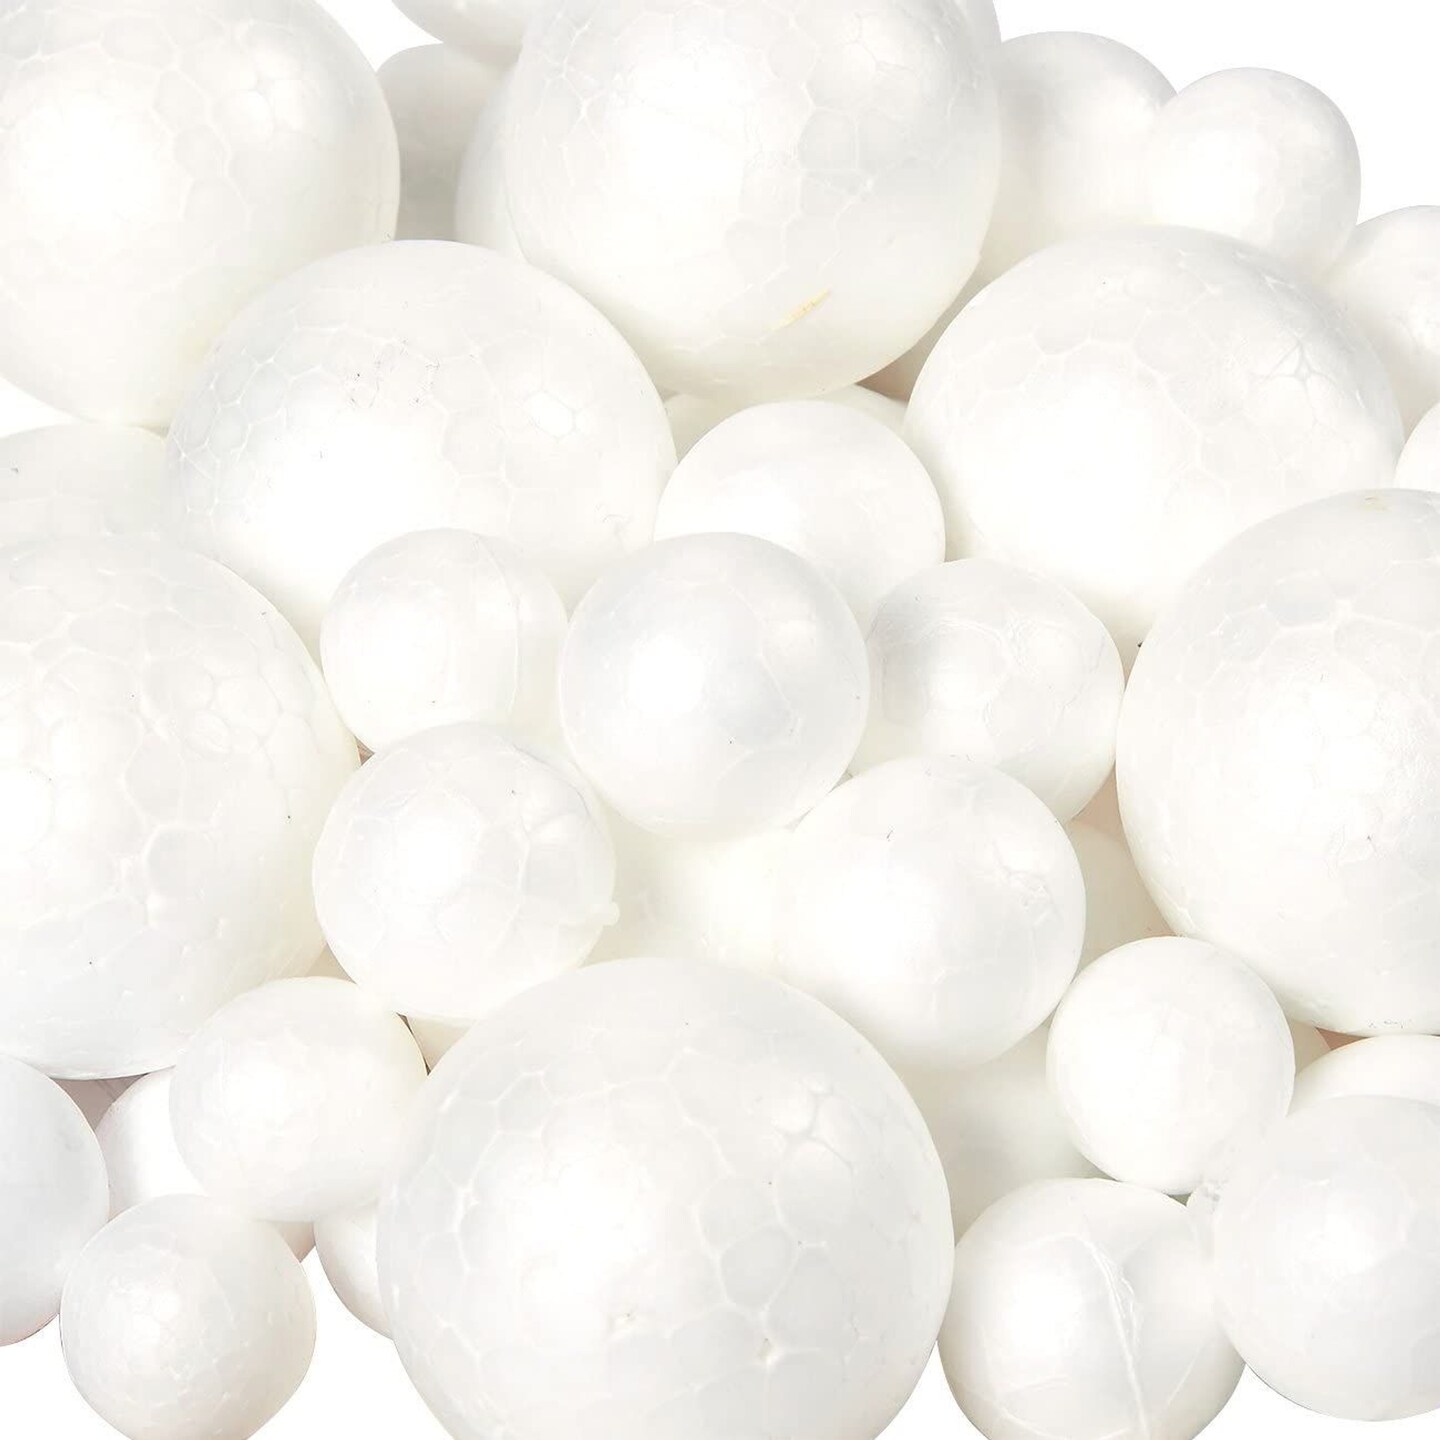 Juvale Foam Balls, Arts and Crafts Supplies (100 Pieces)